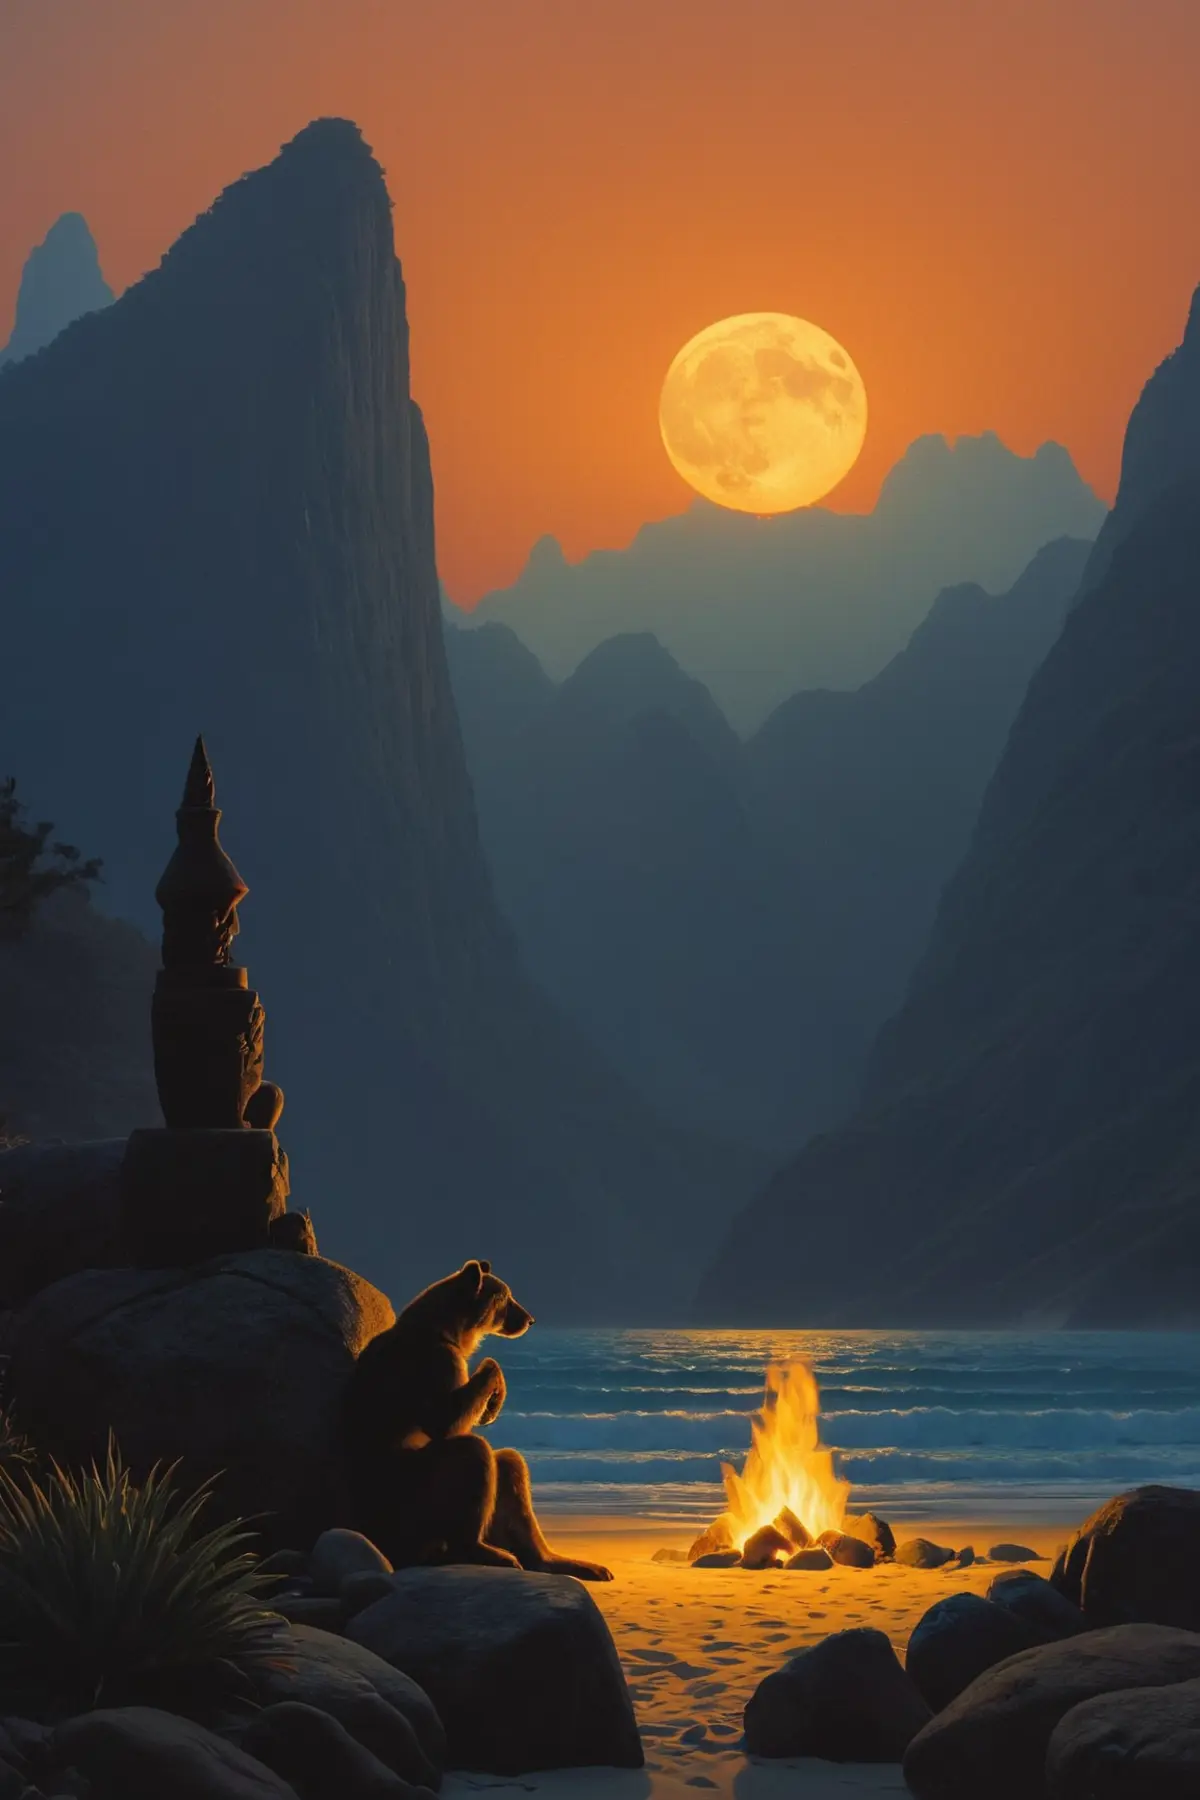 A serene riverside at dusk with a large full moon hanging low in the sky. In the foreground, a lone bear sits beside a small campfire that illuminates the nearby surroundings with an inviting light. Towering mountains rise steeply on either side of the river, framing the scene.